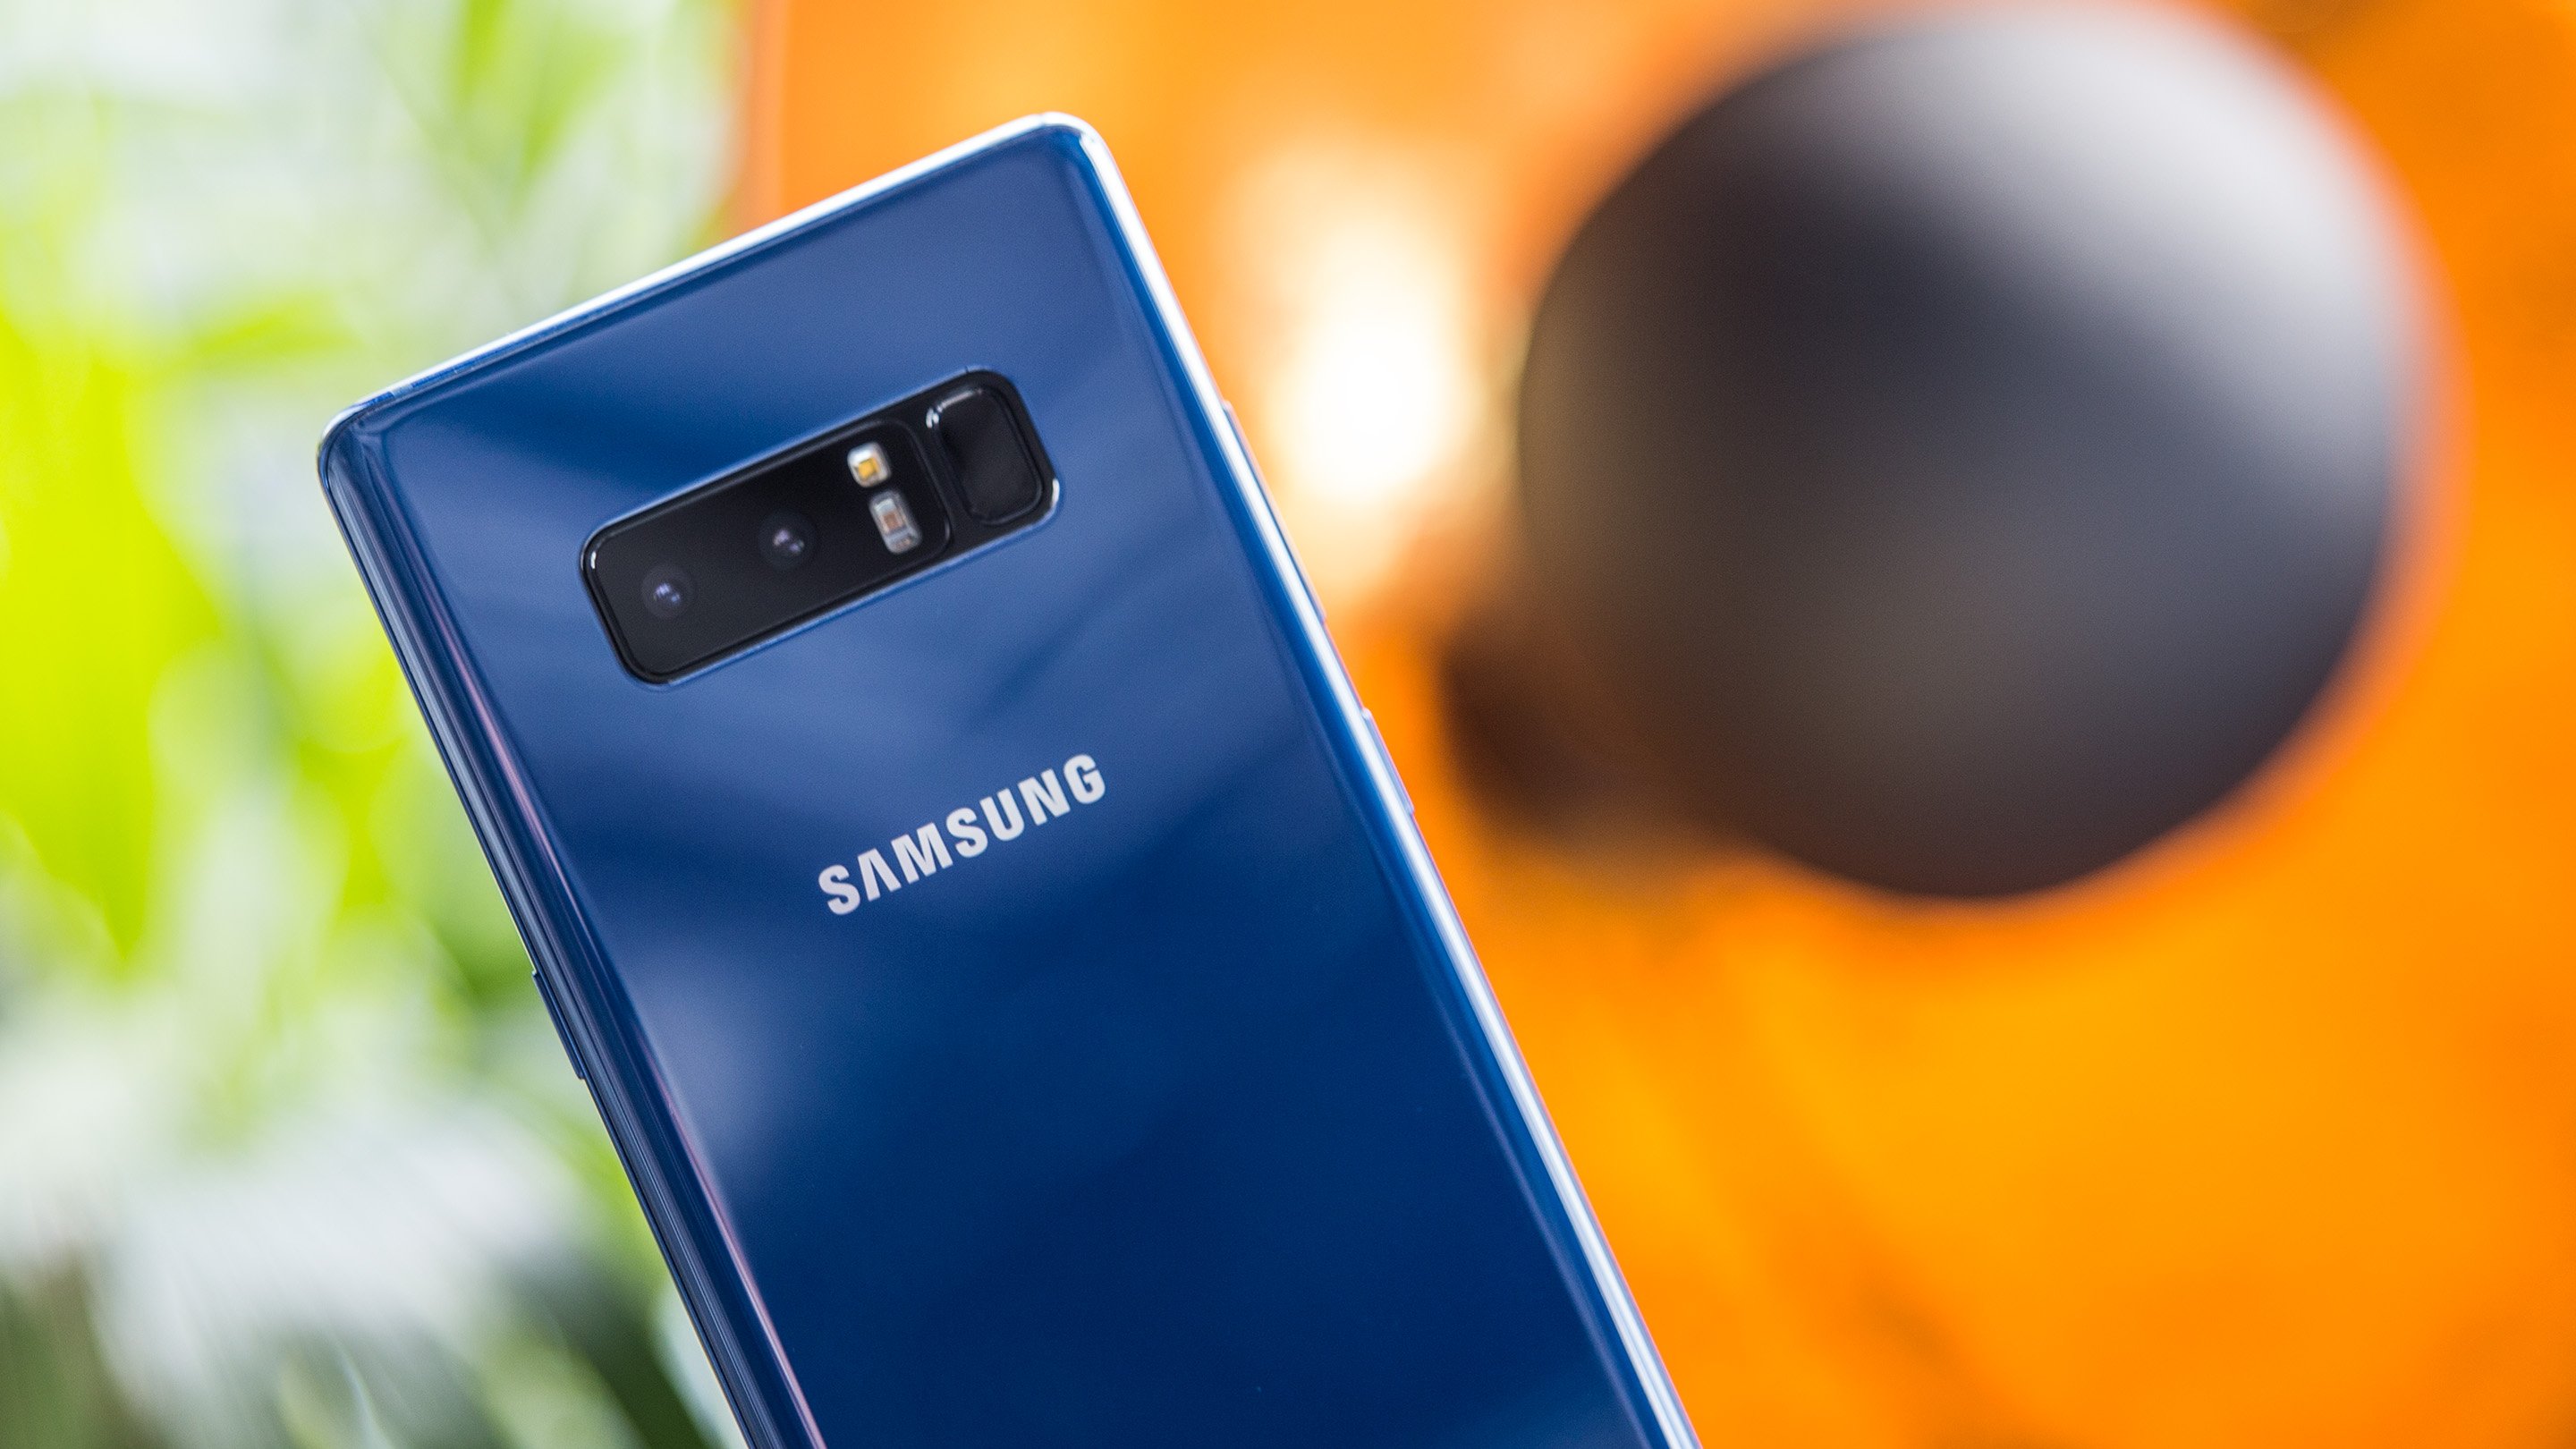 Samsung note 8 256. Samsung Galaxy Note 8. Galaxy Note 8 Blue. Samsung Galaxy Note 8 синий. Samsung Galaxy Note 8 64gb.